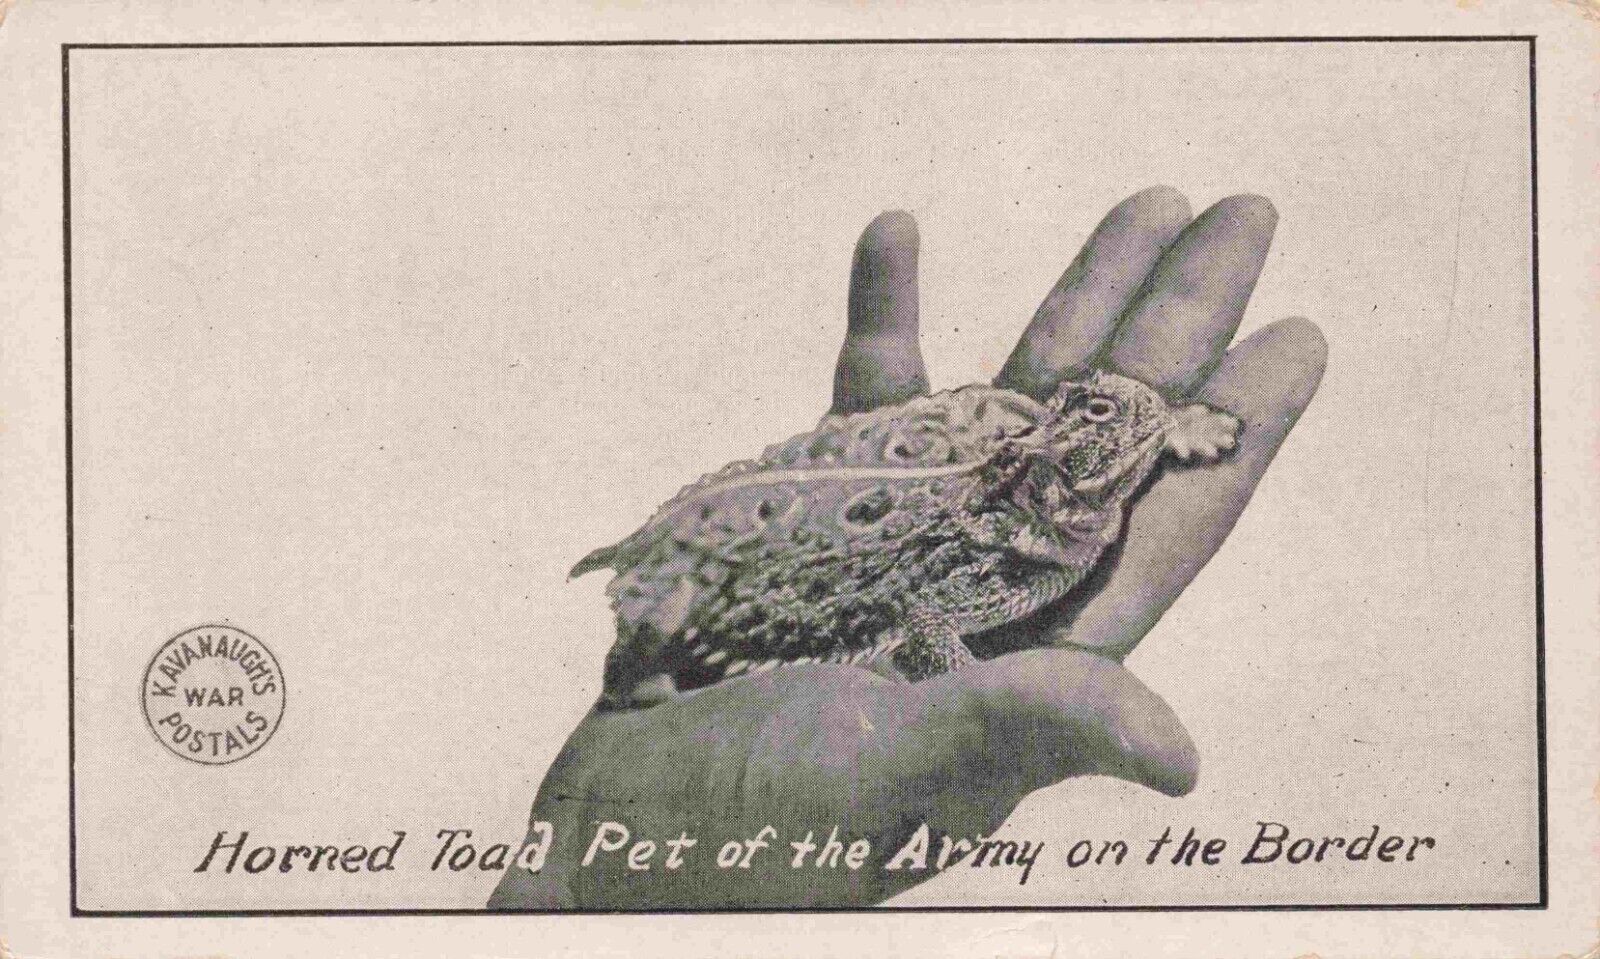 Horned Toad Pet of the Army El Paso Texas Kavanaugh's War Postals Postcard